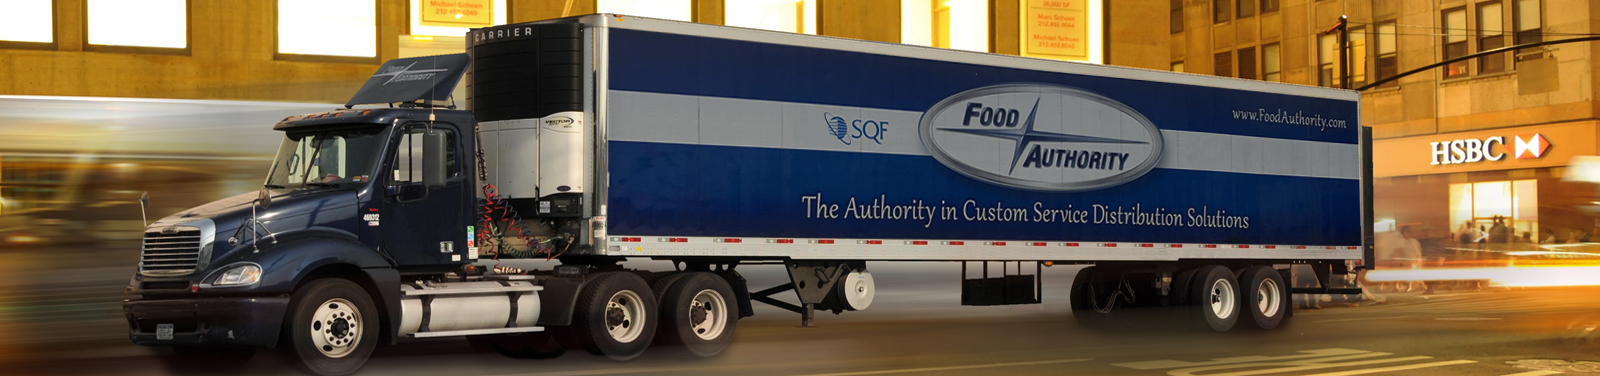 Food Authority Delivering Value